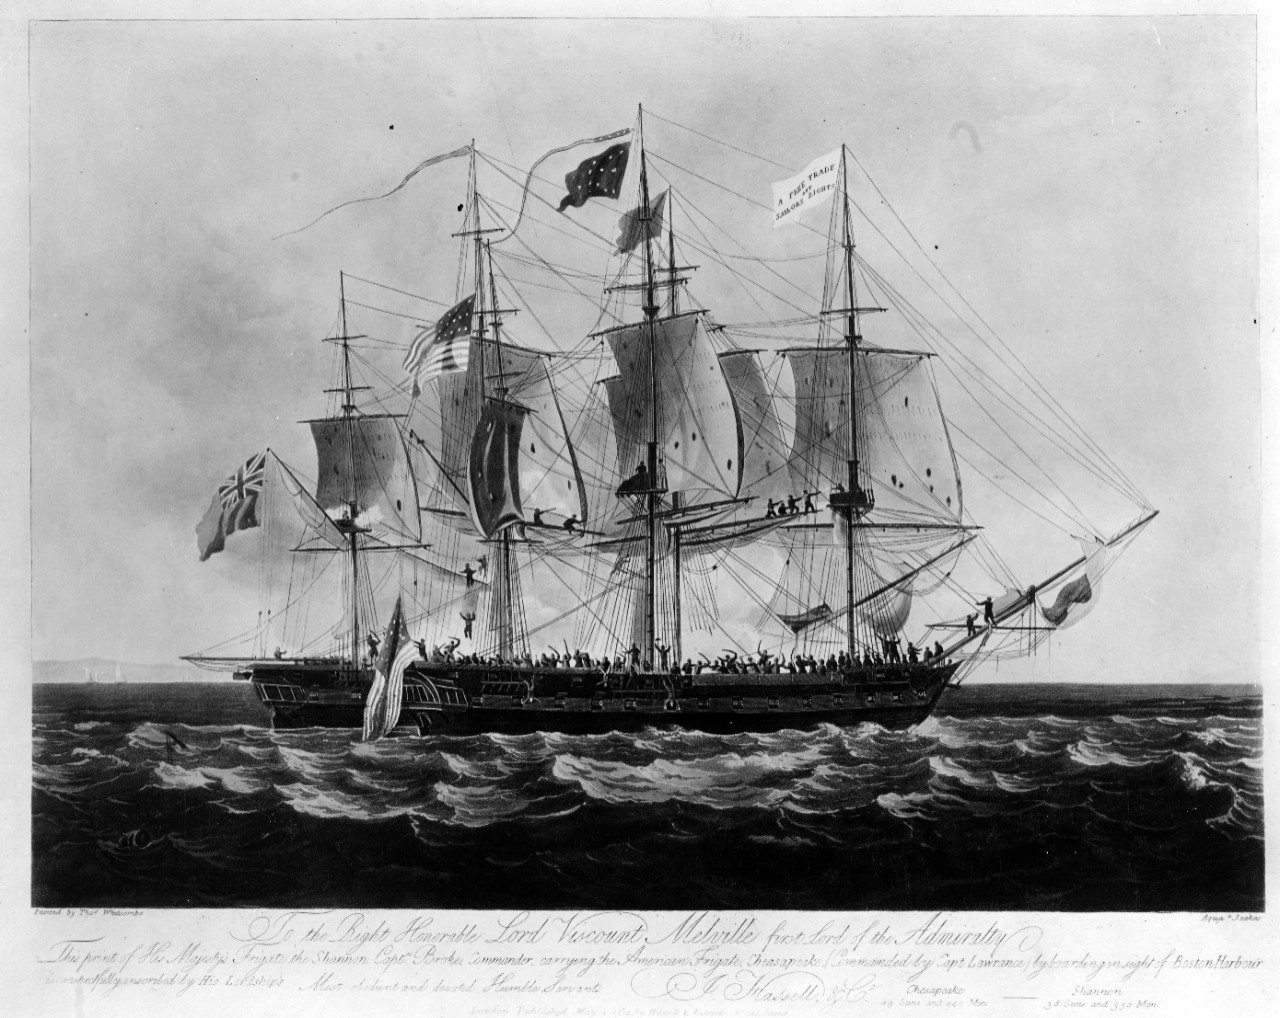 Photo #: NH 42905  Engagement between USS Chesapeake and HMS Shannon, 1 June 1813